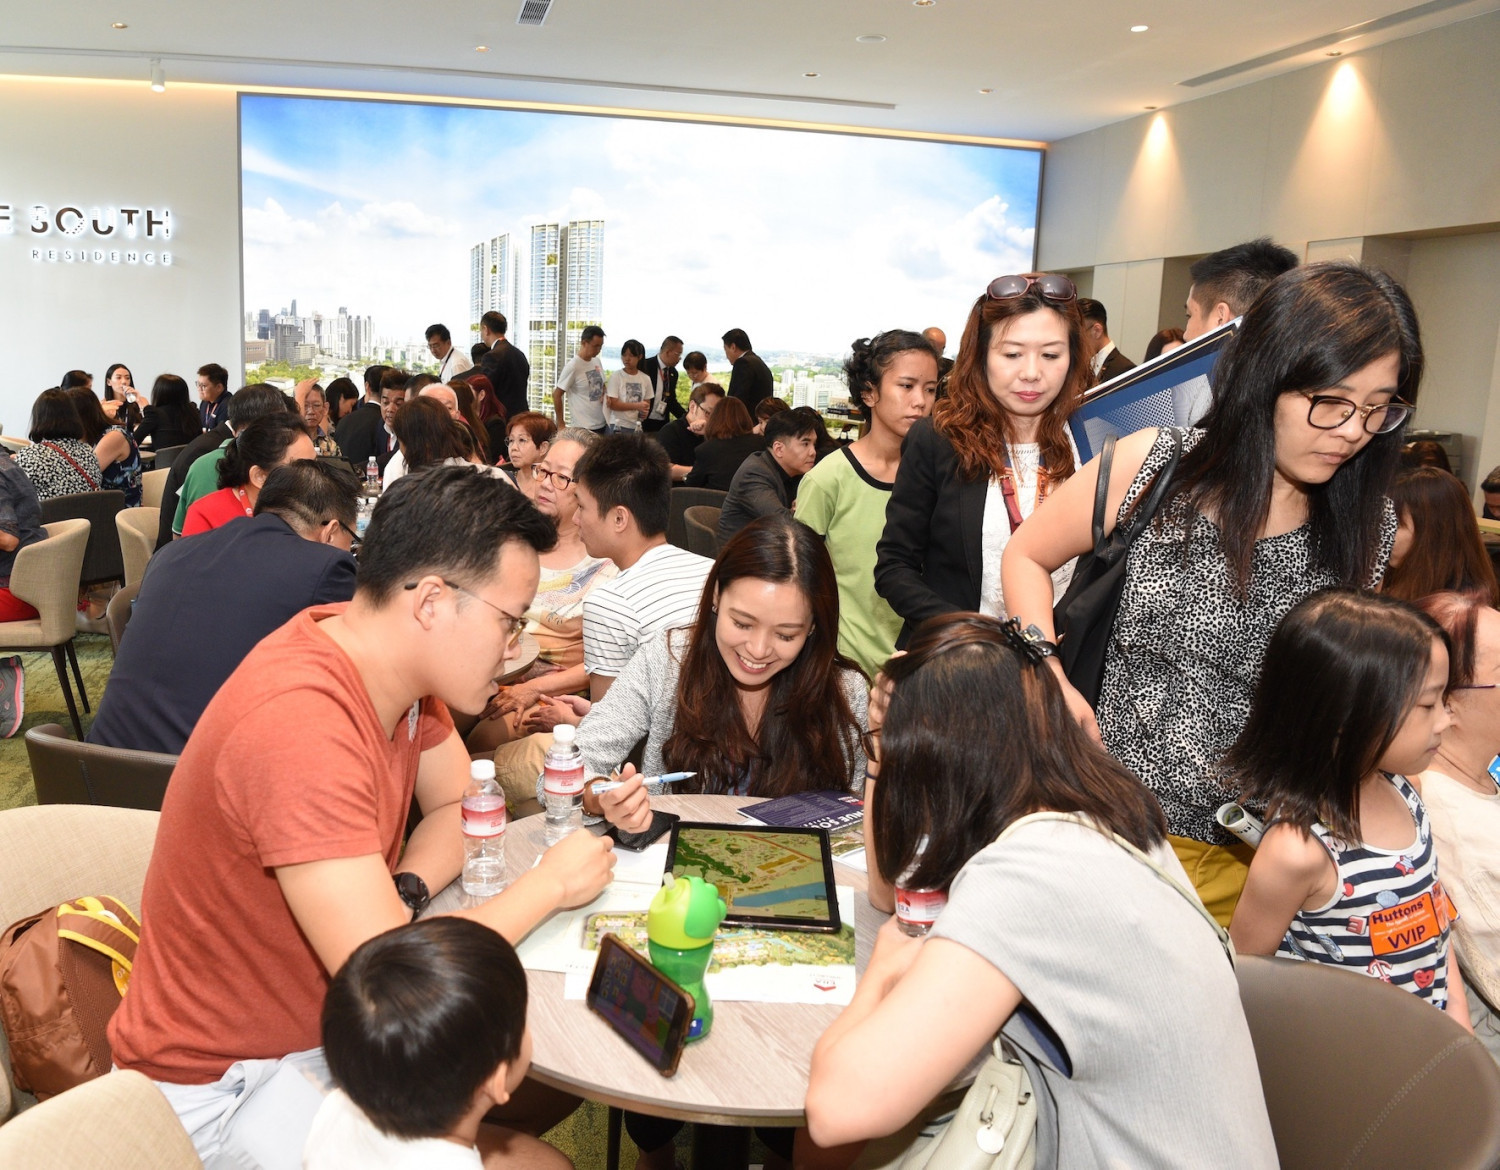 Avenue South Residence draws 4,500 people on preview weekend - Property News